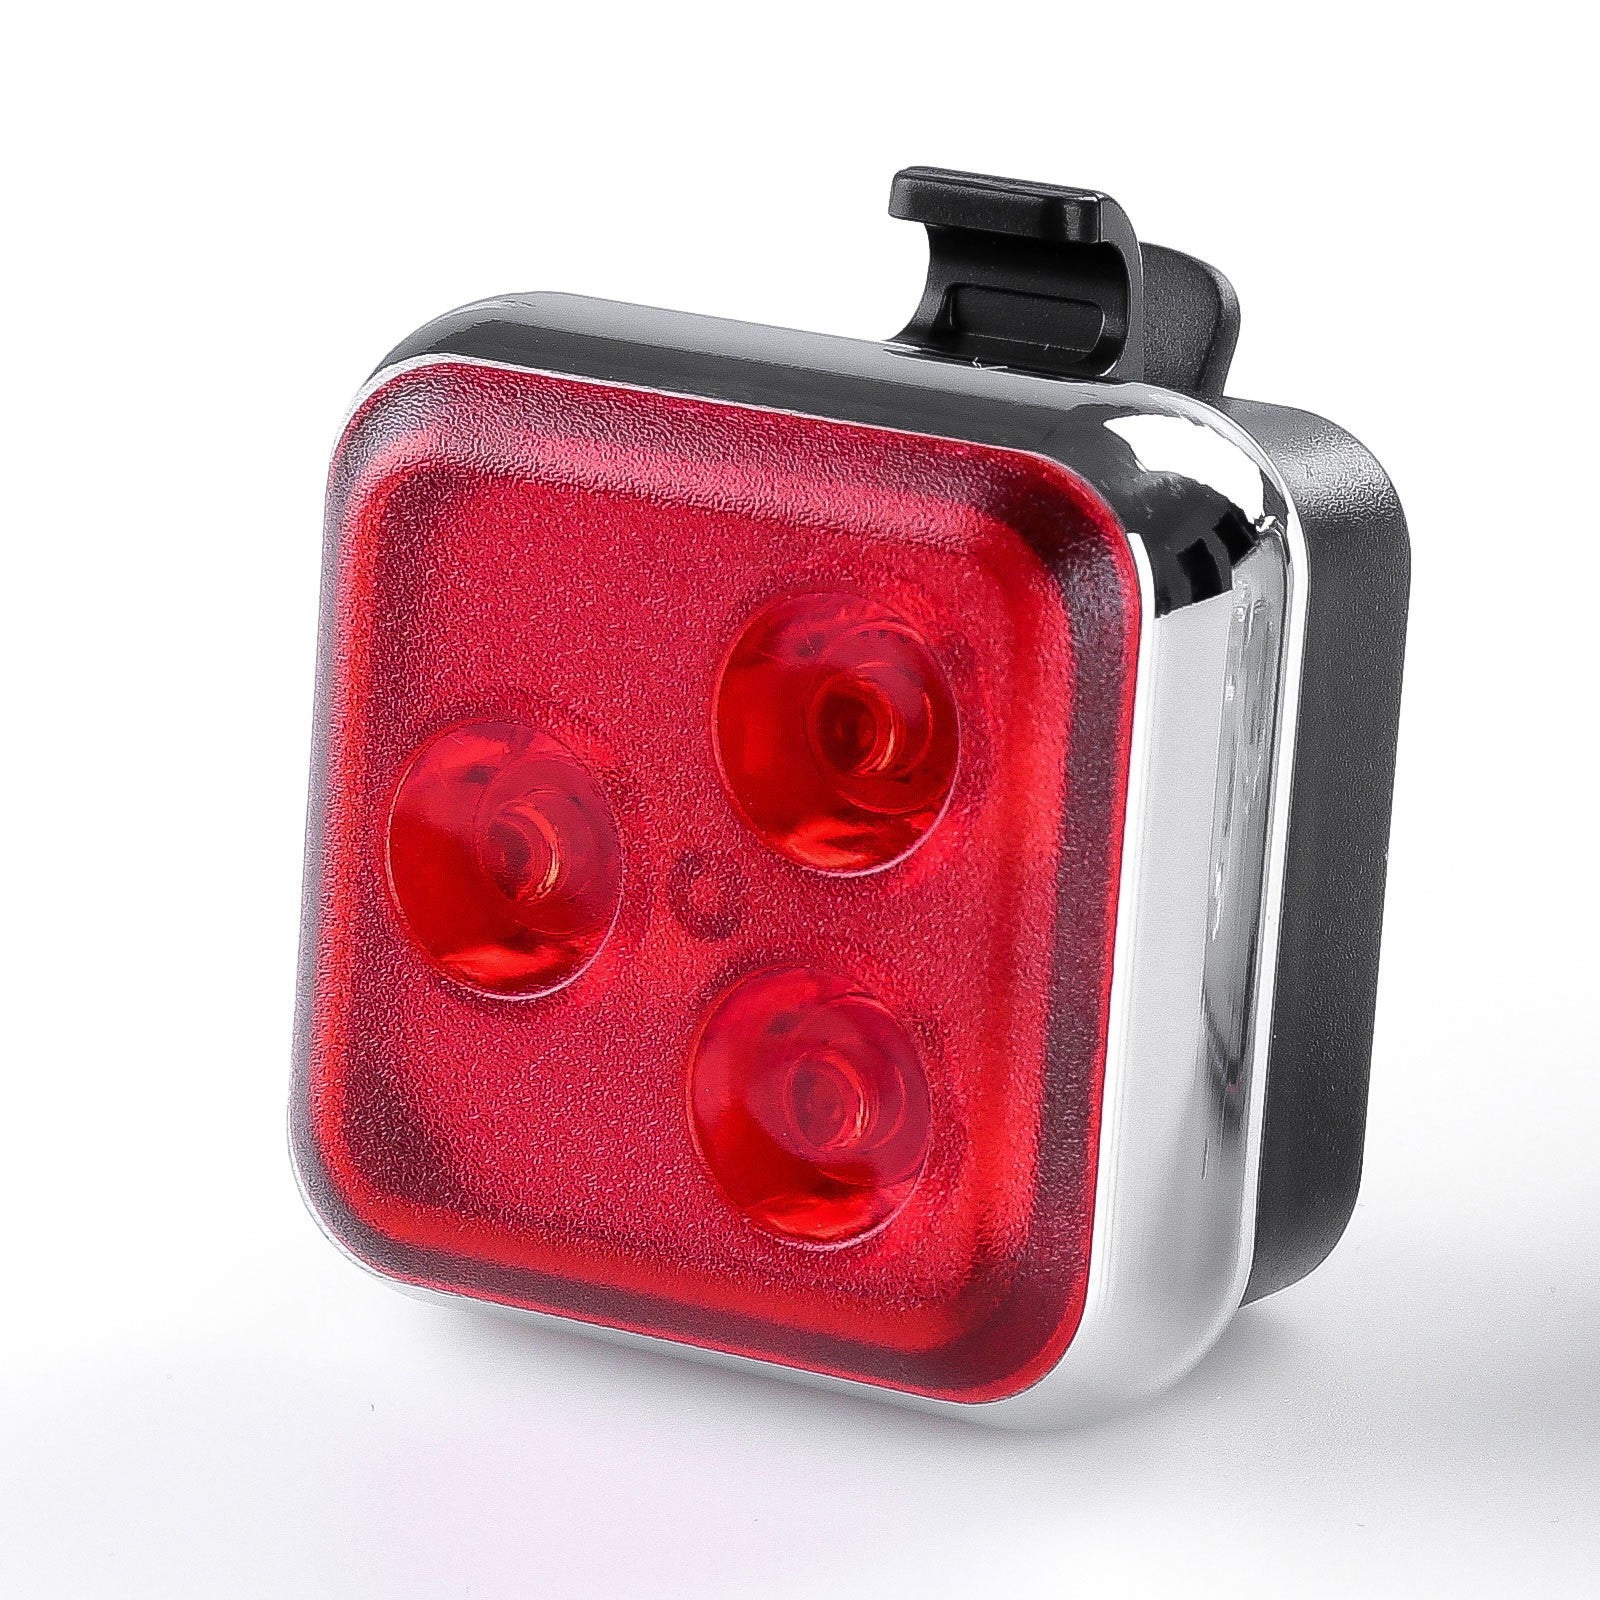 032 Mountain Bike Taillight USB Rechargeable Bicycle Light Bicycle Aluminum Alloy Warning Light Accessories Cycling Fixture